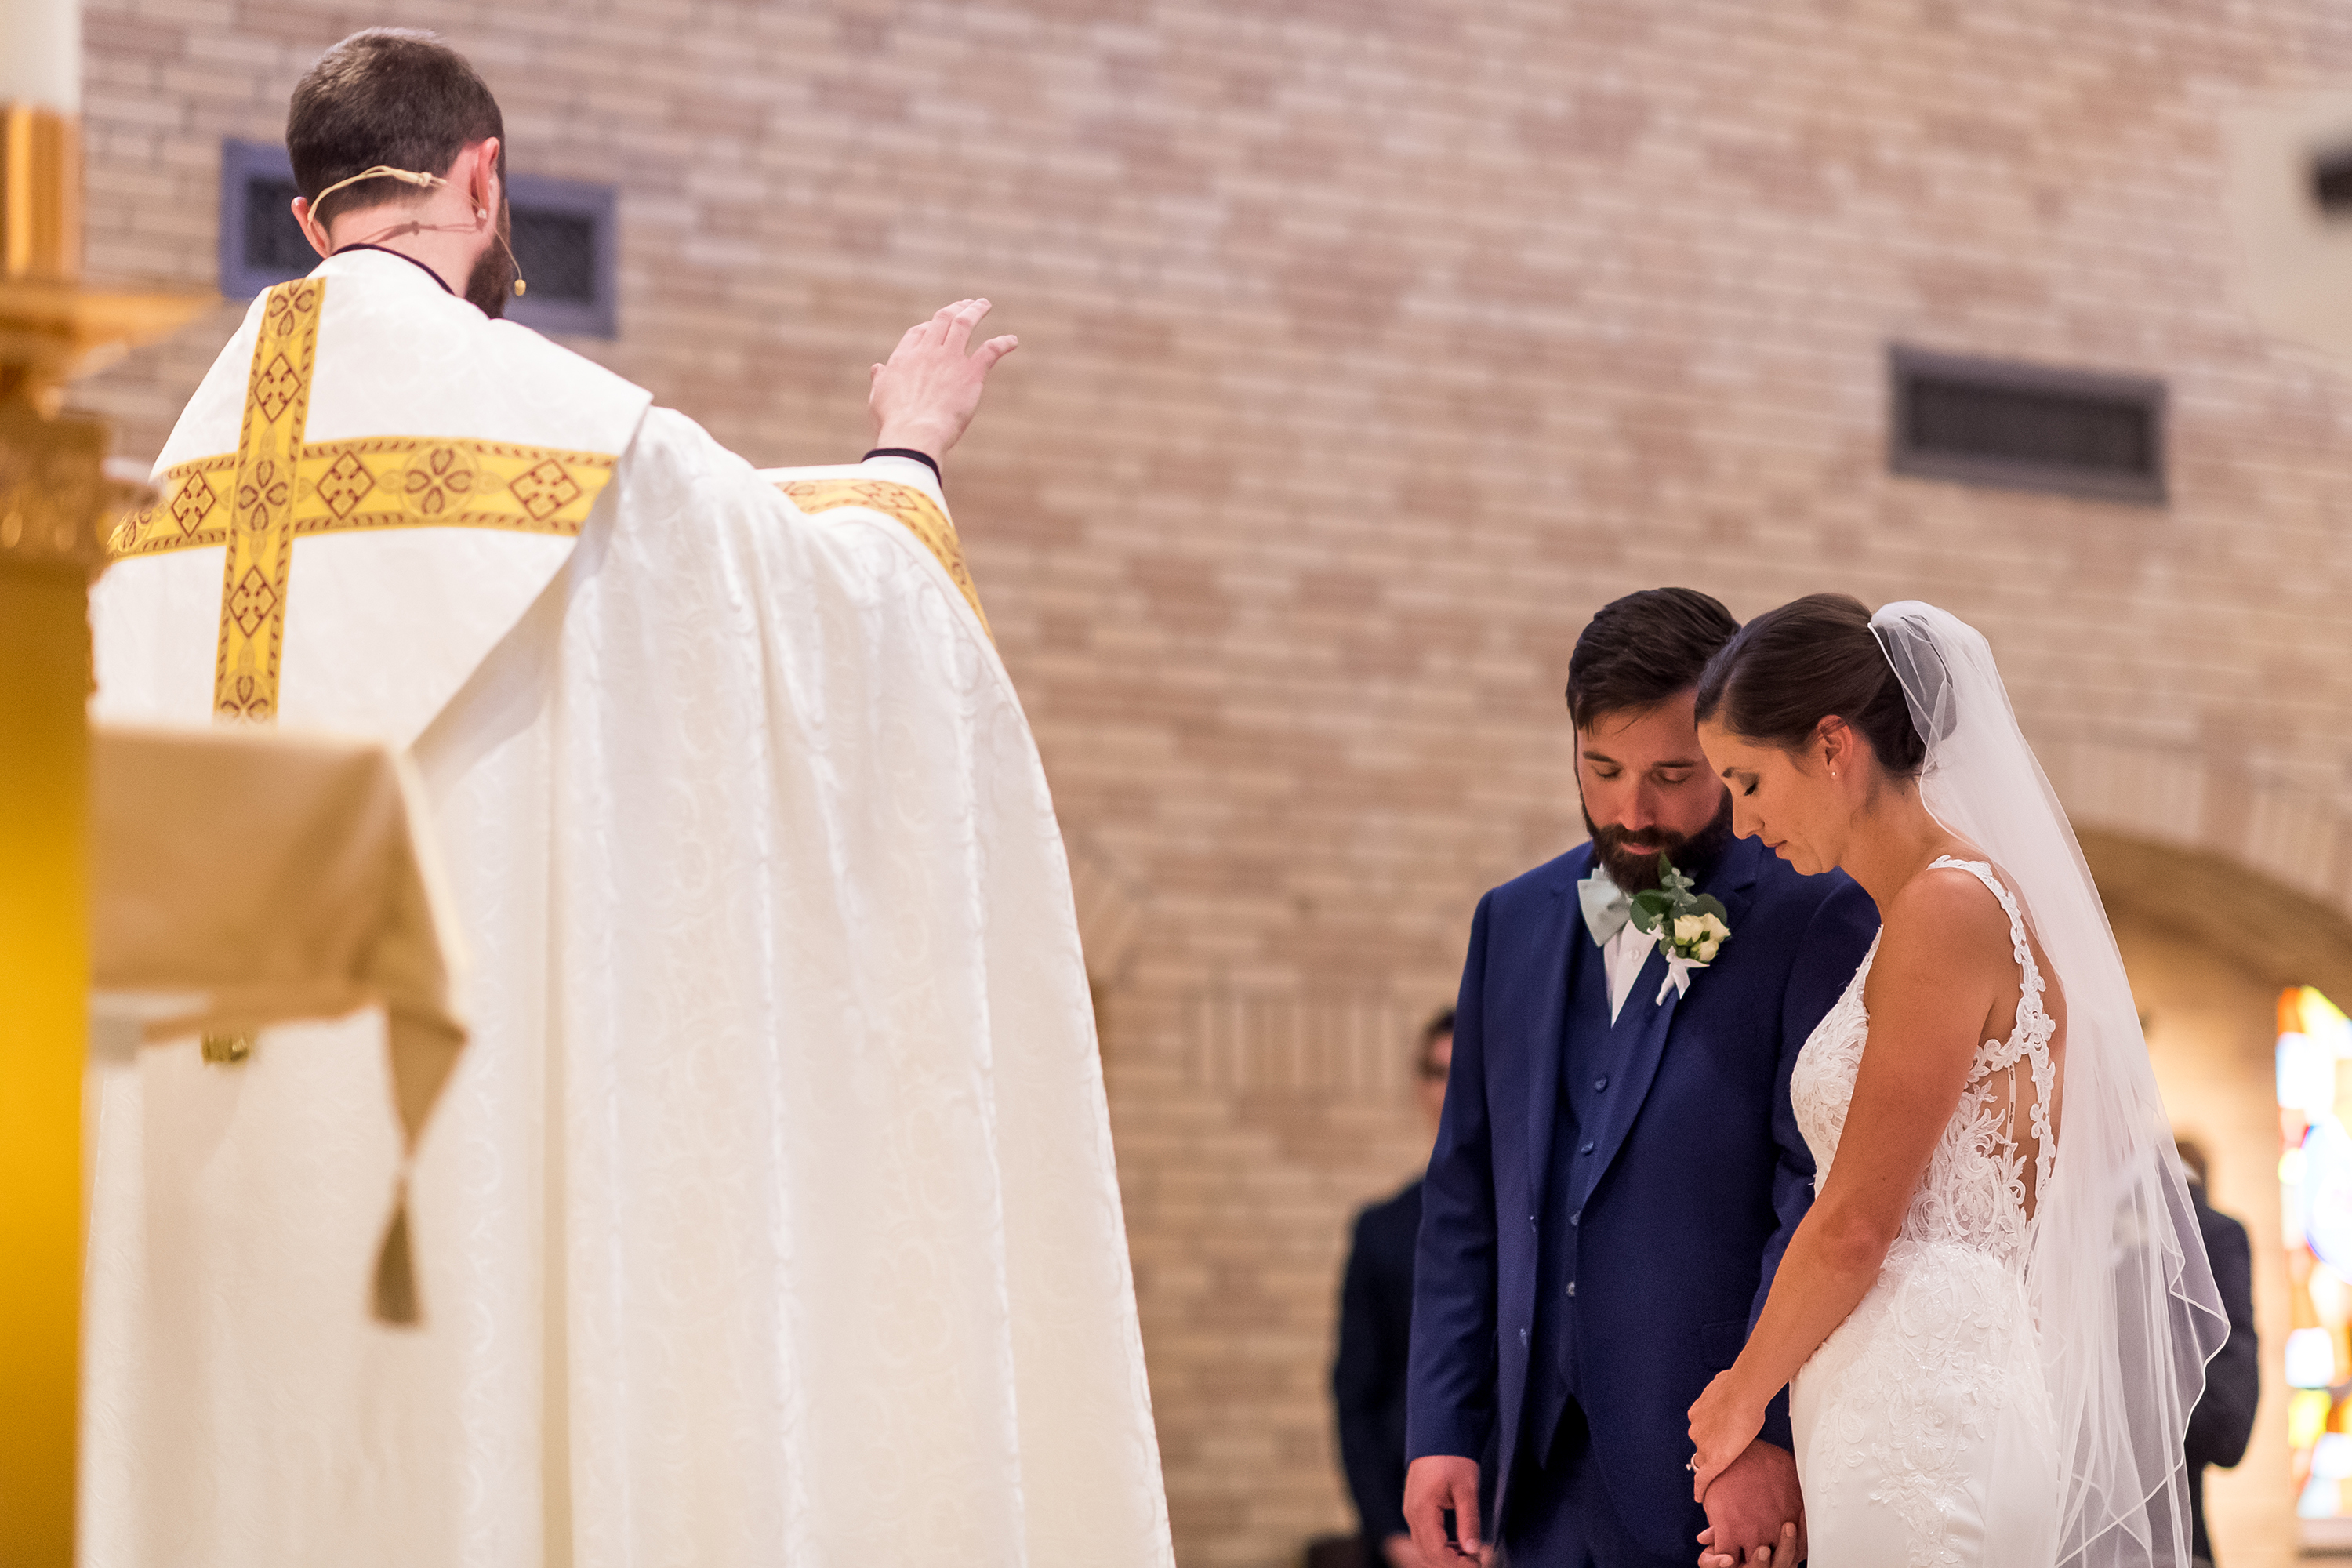 Receiving a blessing during a wedding at Our Lady of Lourdes Catholic Church in Denver, Colorado